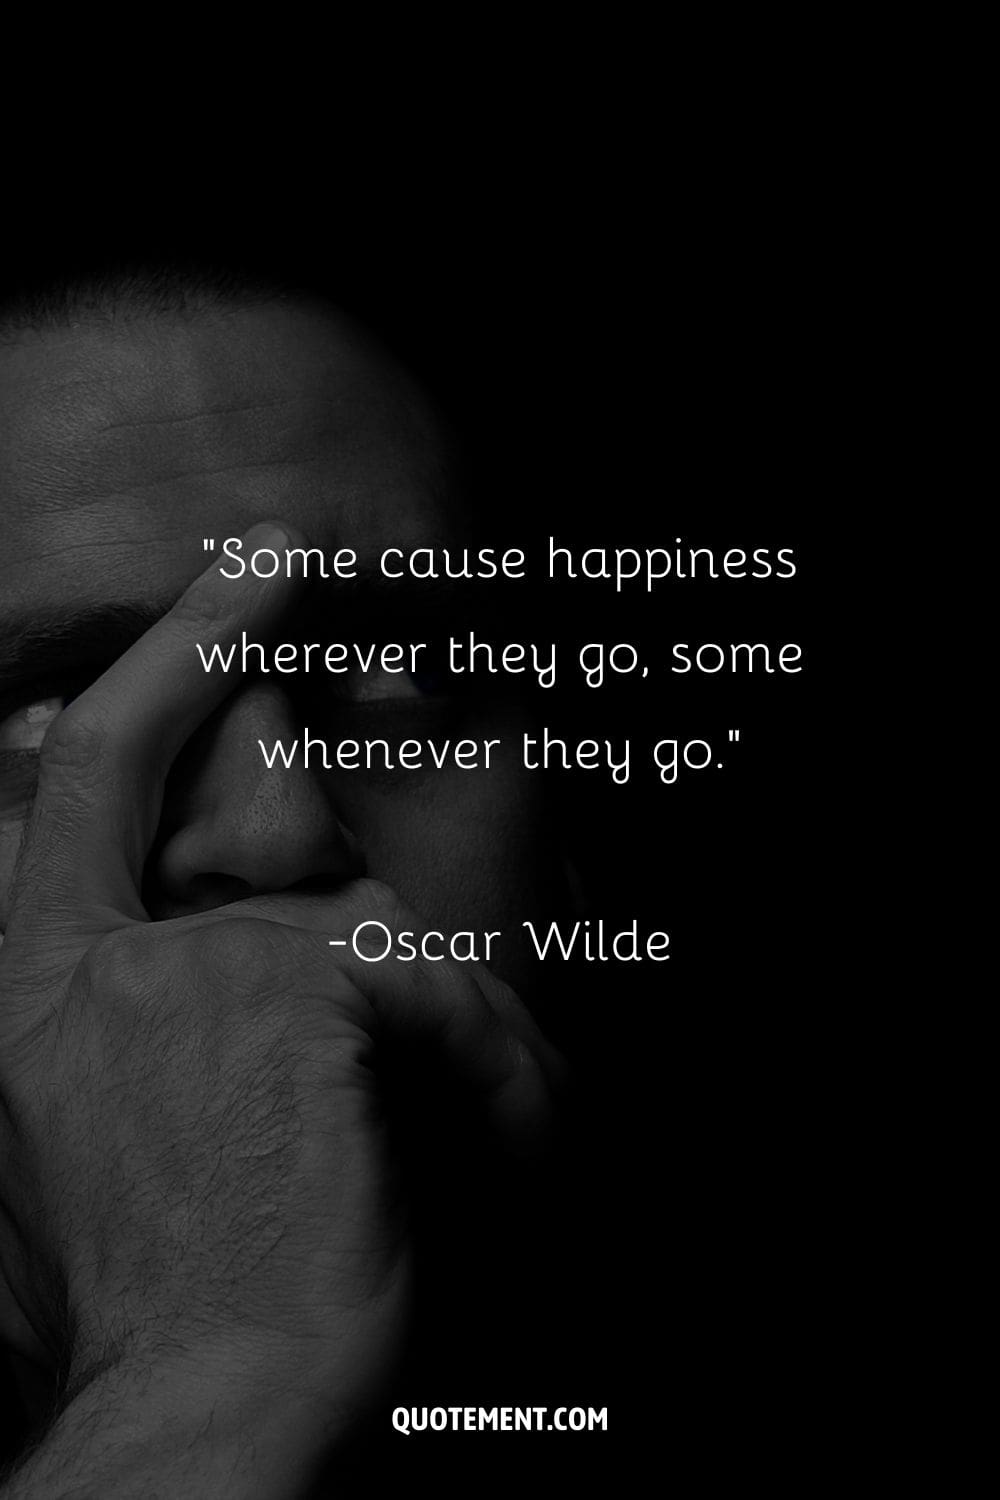 “Some cause happiness wherever they go, some whenever they go.” ― Oscar Wilde